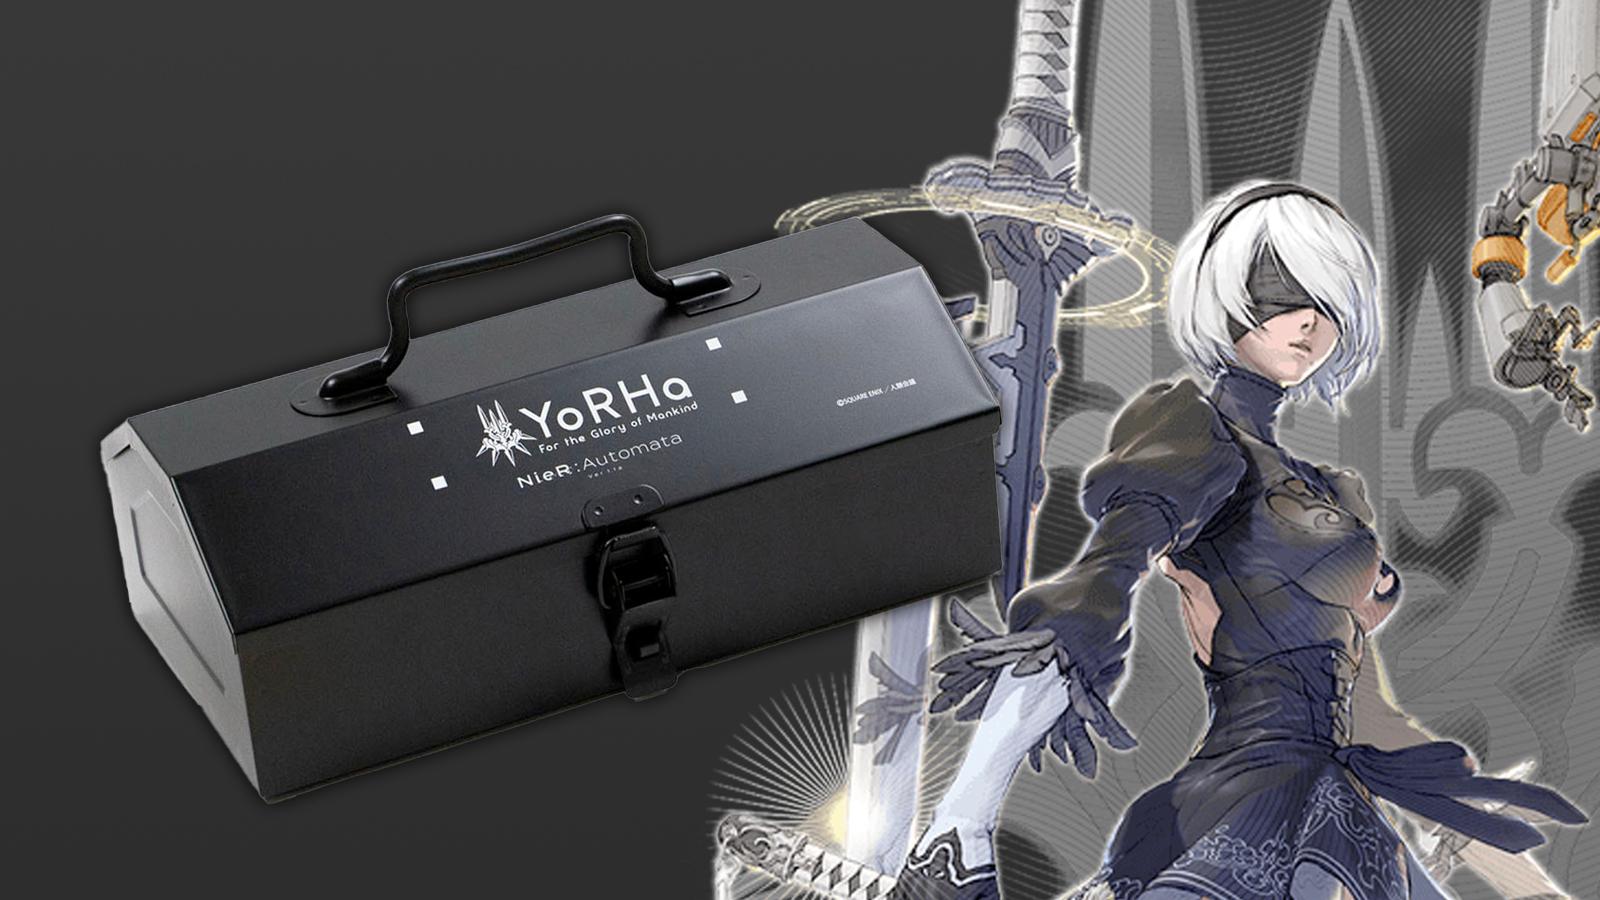 nier automata toolbox on top of image of 2b